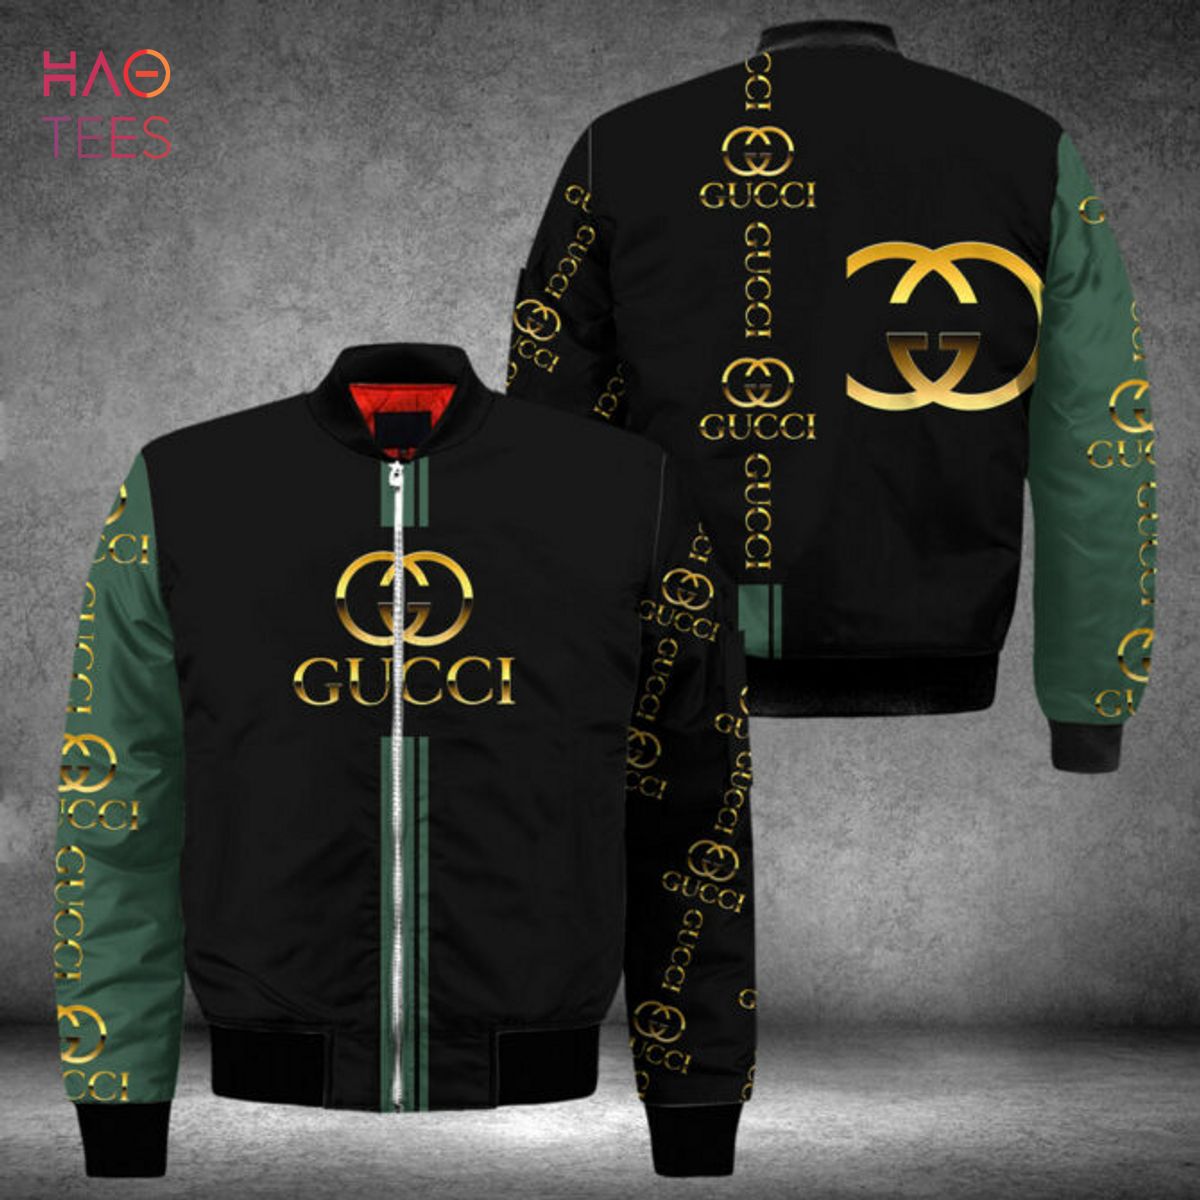 HOT Gucci Luxury Brand Black Mix Green Bomber Jacket Limited Edition